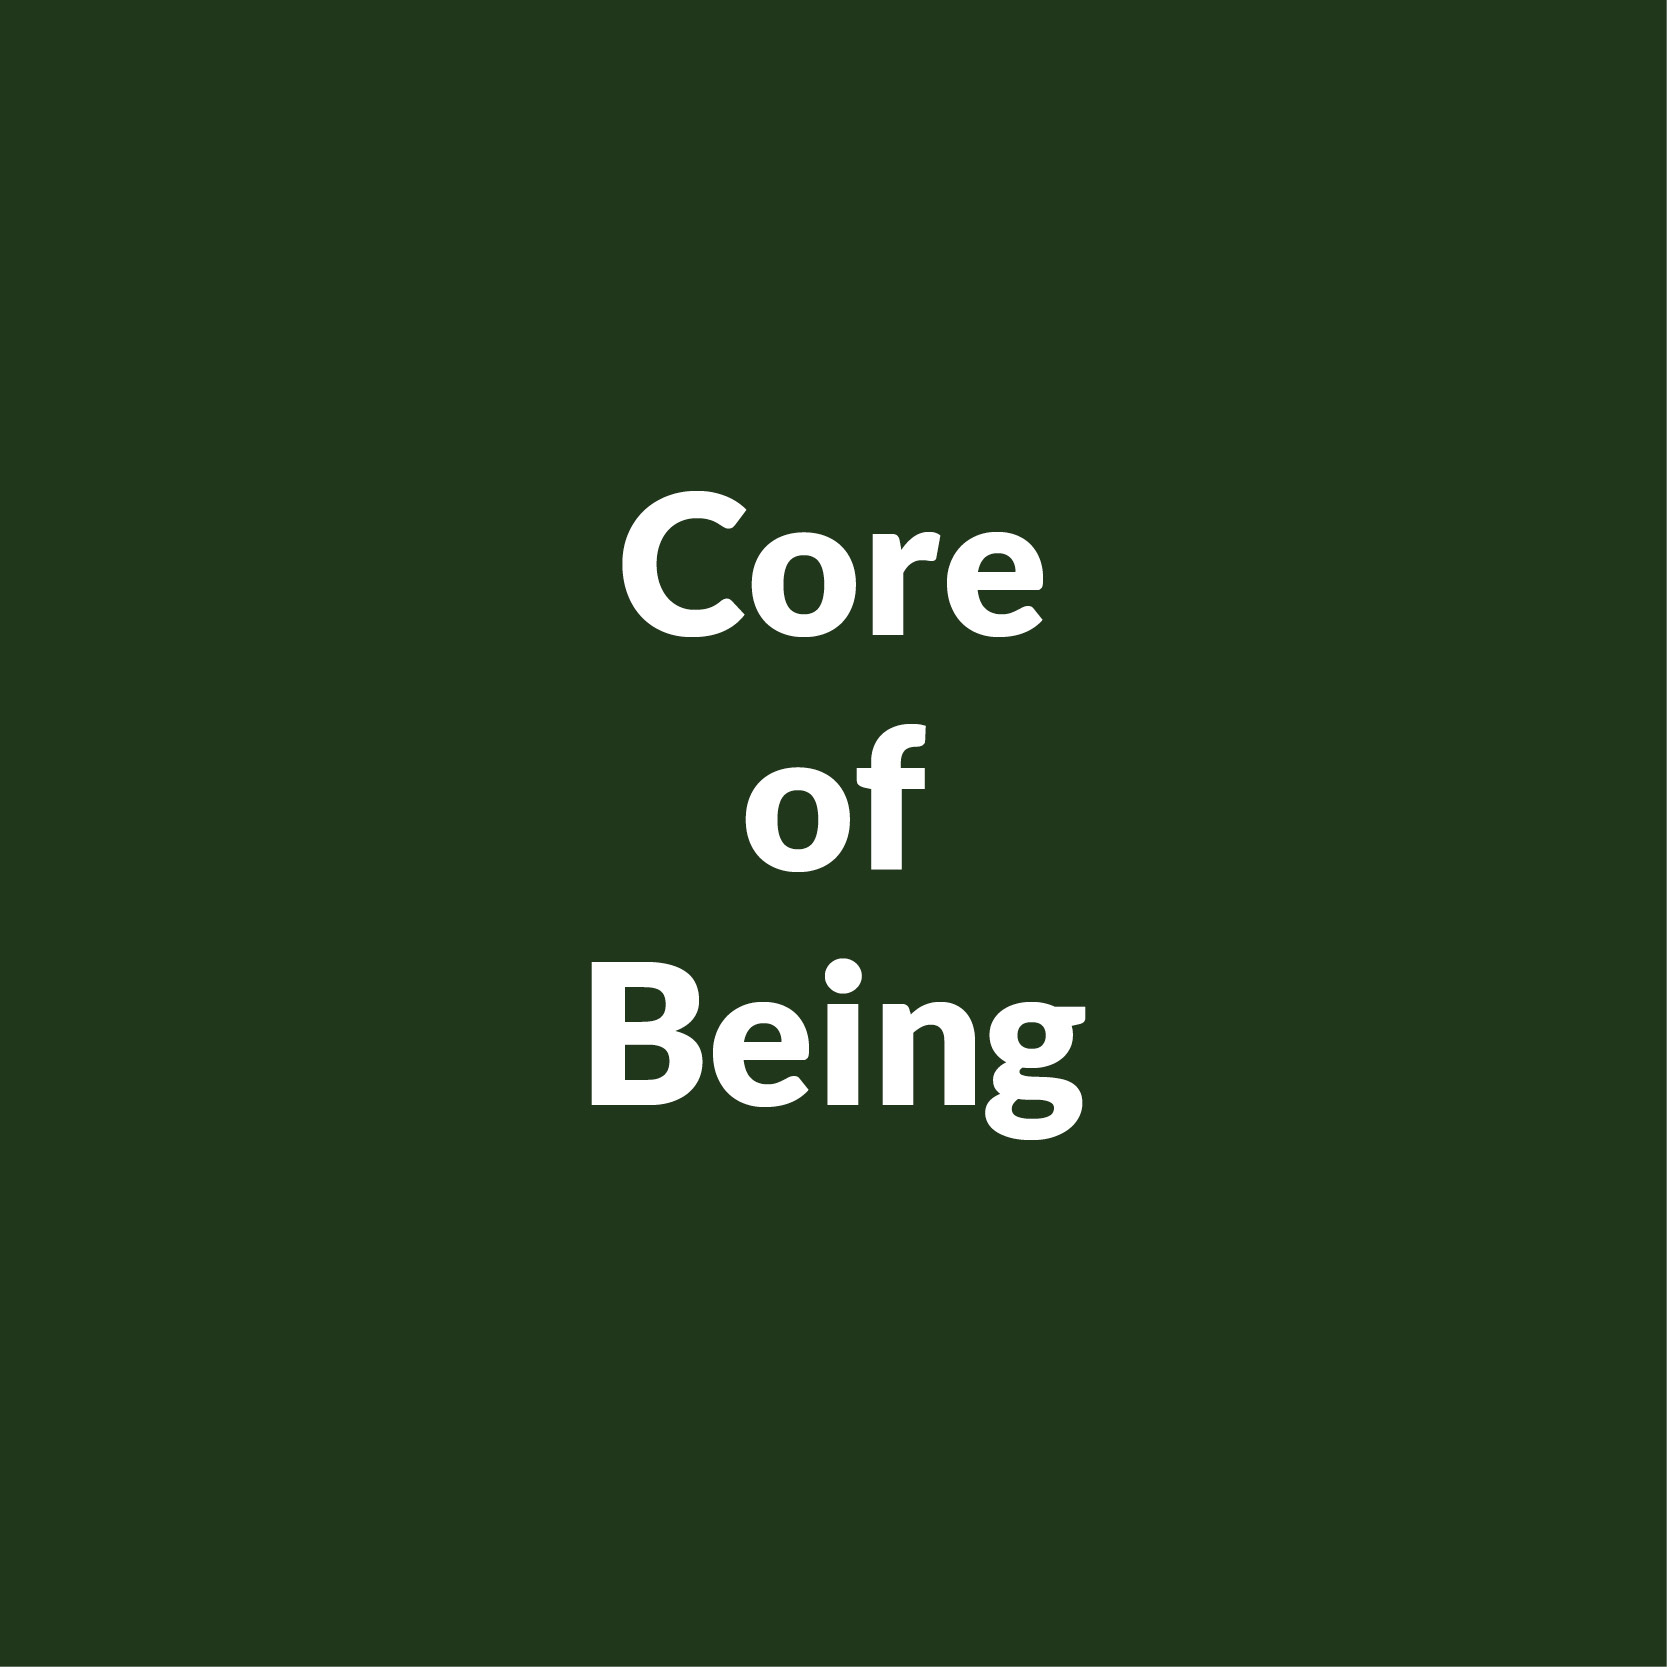 Core of Being